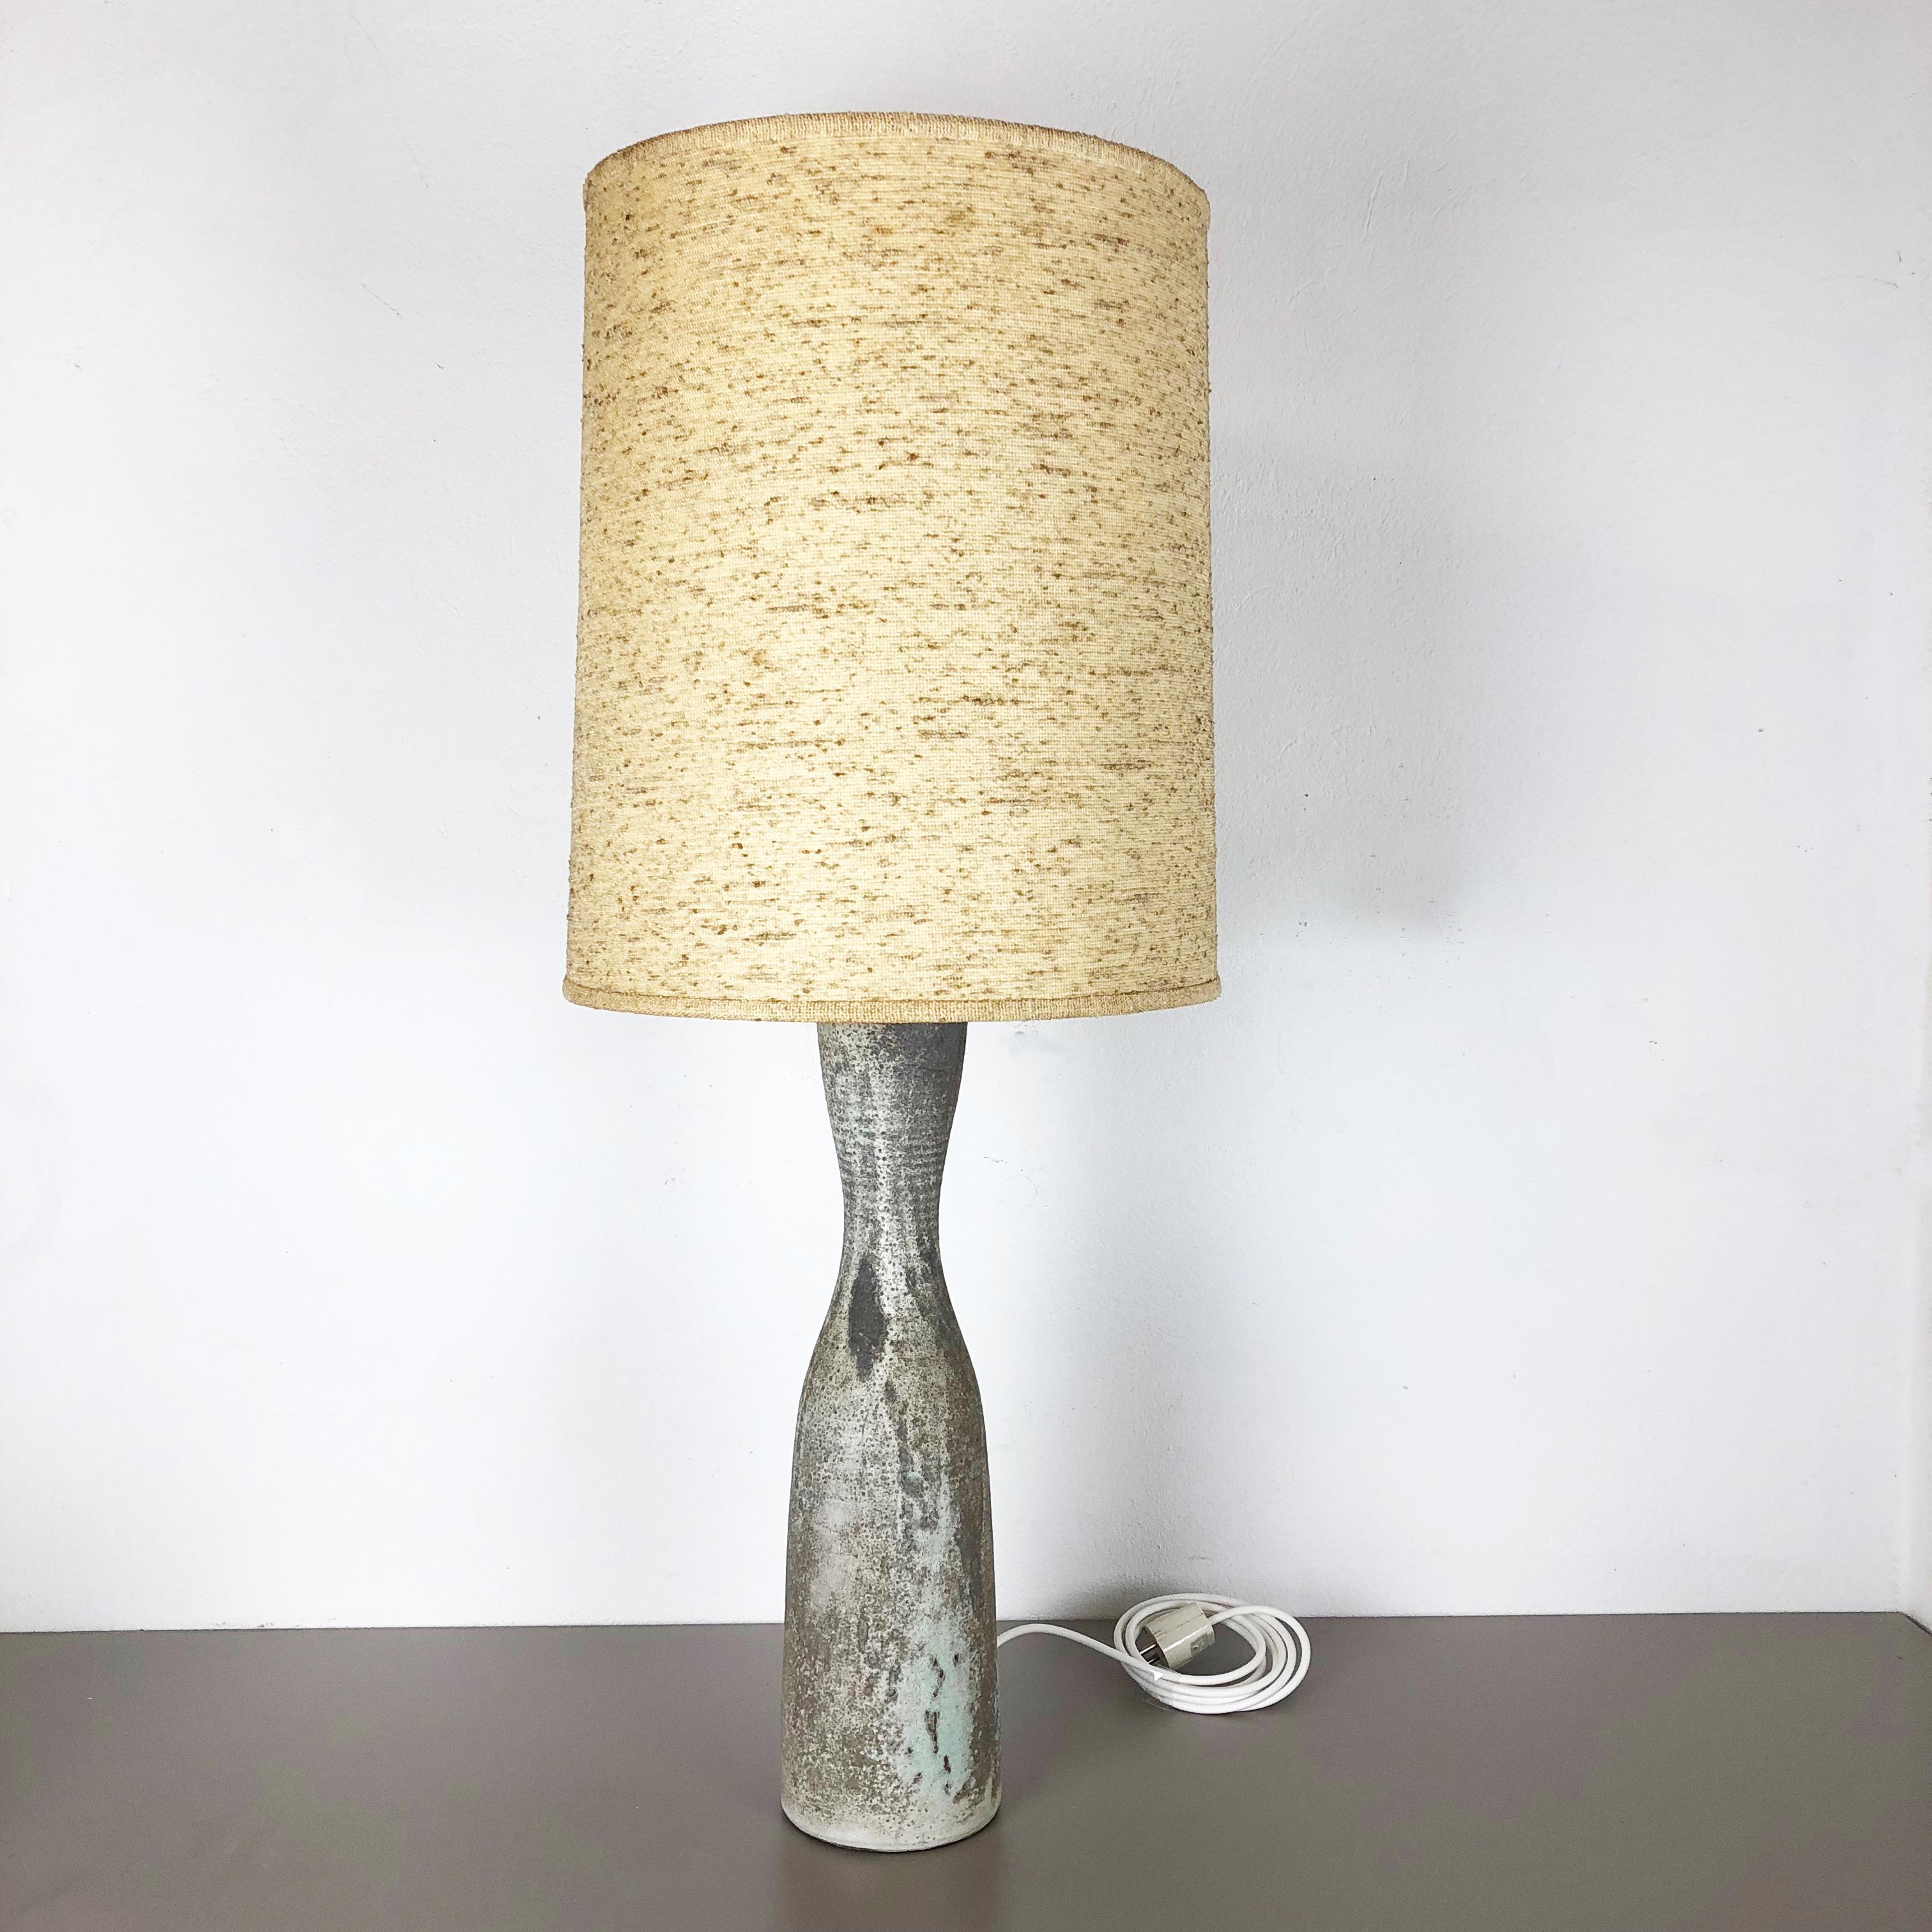 Ceramic Studio Pottery Table Light by Piet Knepper for Mobach, Netherlands 1960s For Sale 13